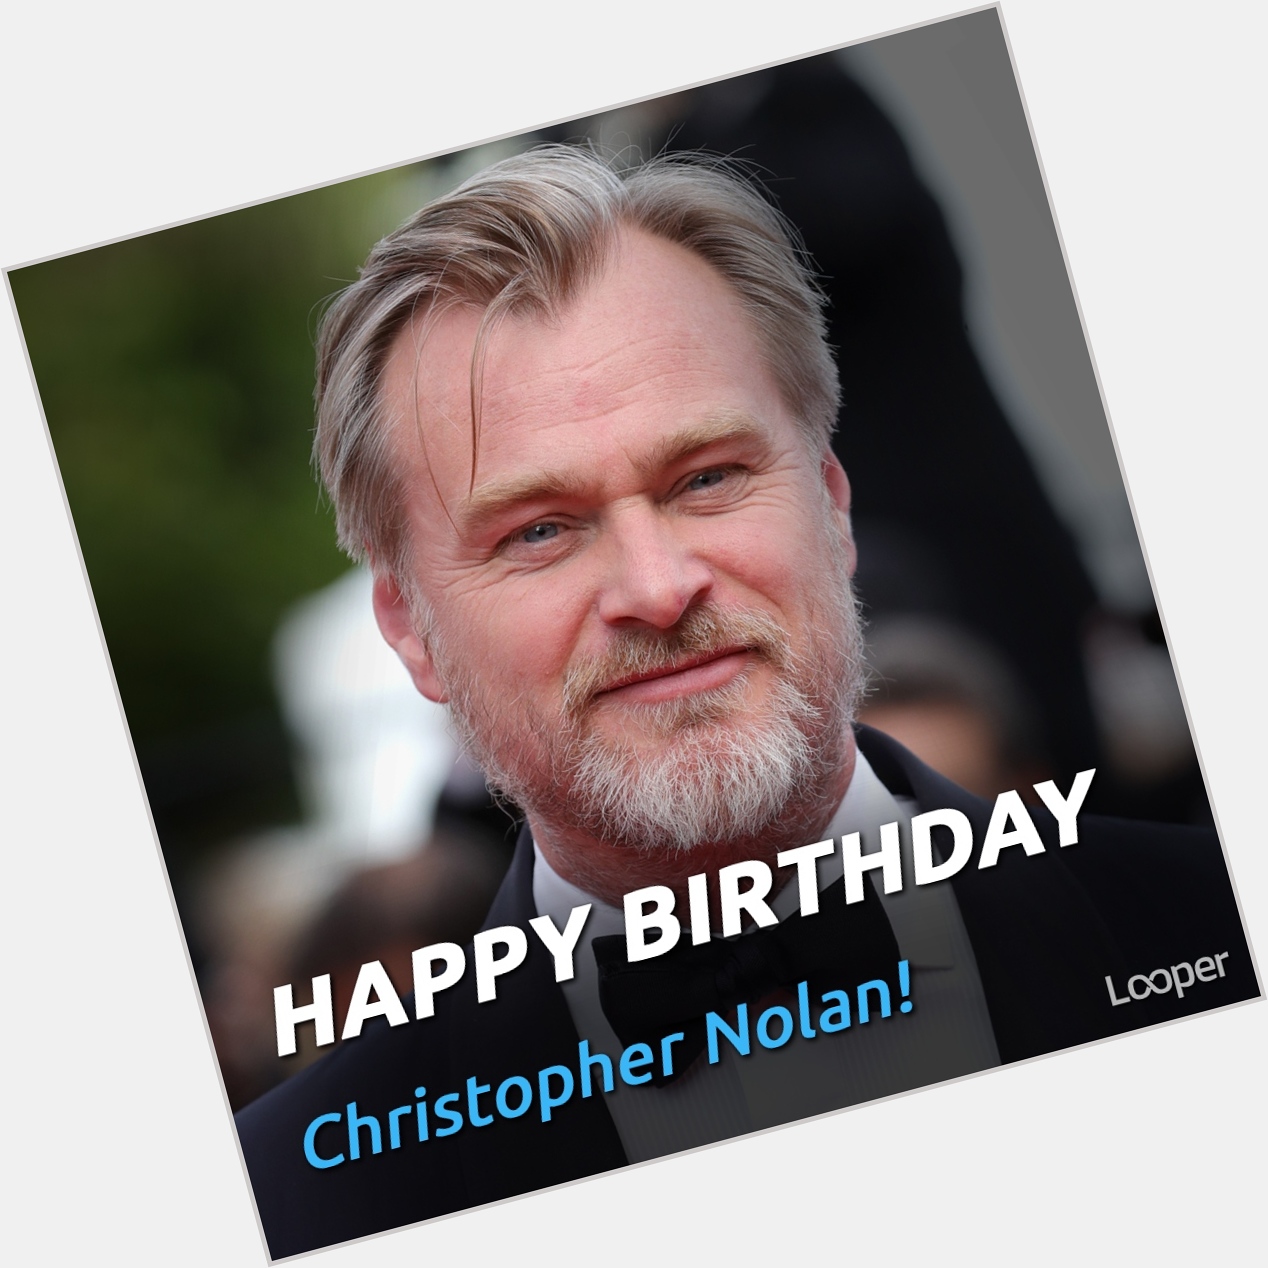 Happy Birthday Christopher Nolan!

What is your favorite film? 